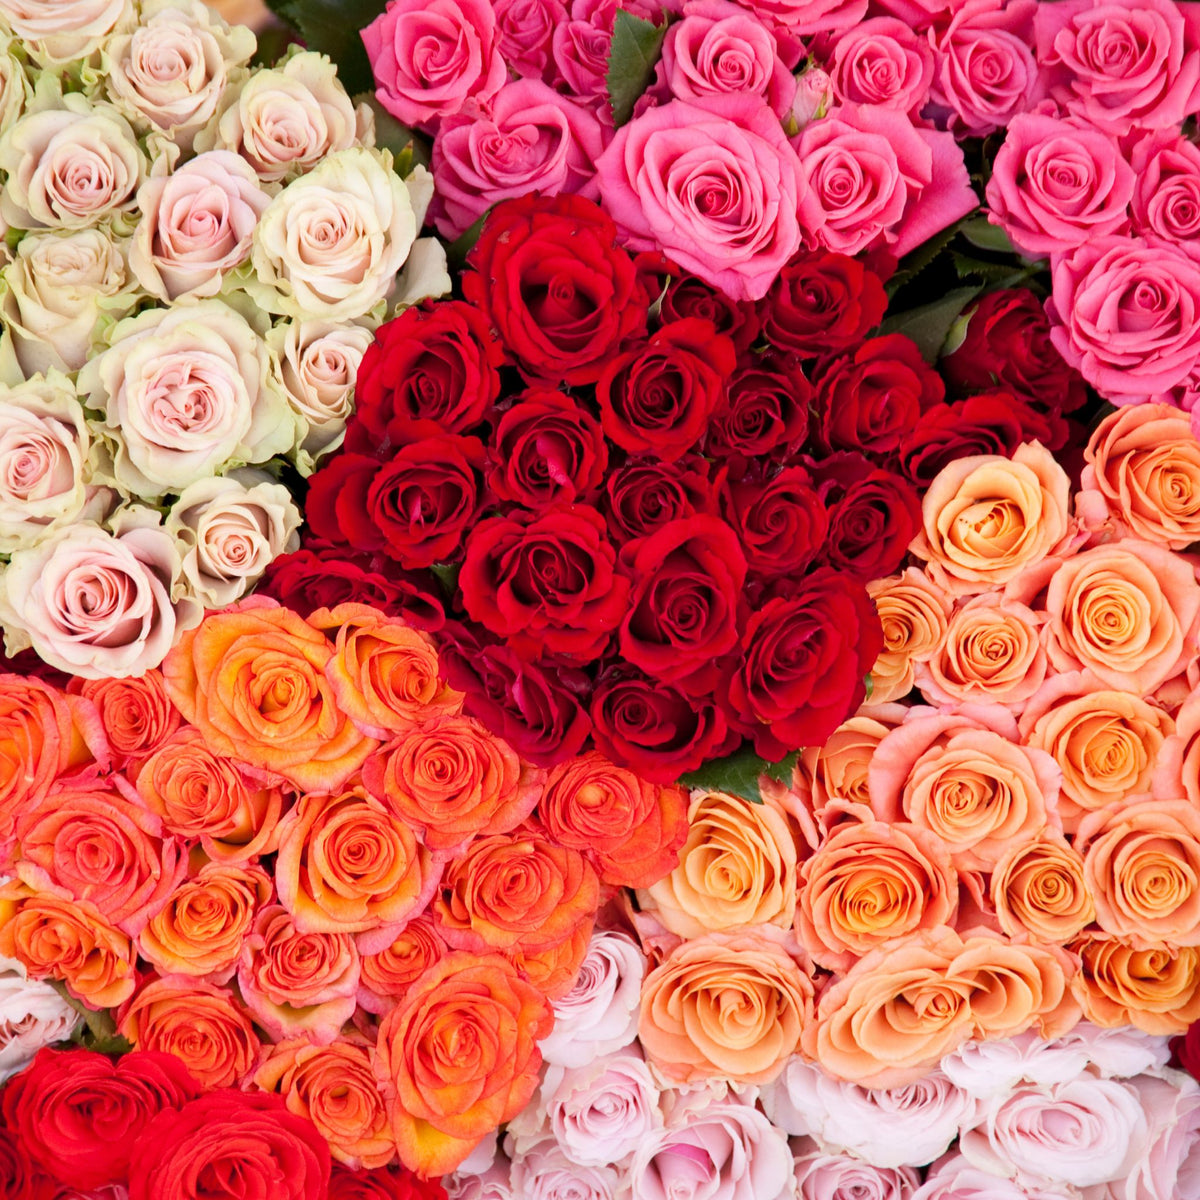 Valentines Build Your Rose Boxes (400 stems) - Floral Professionals